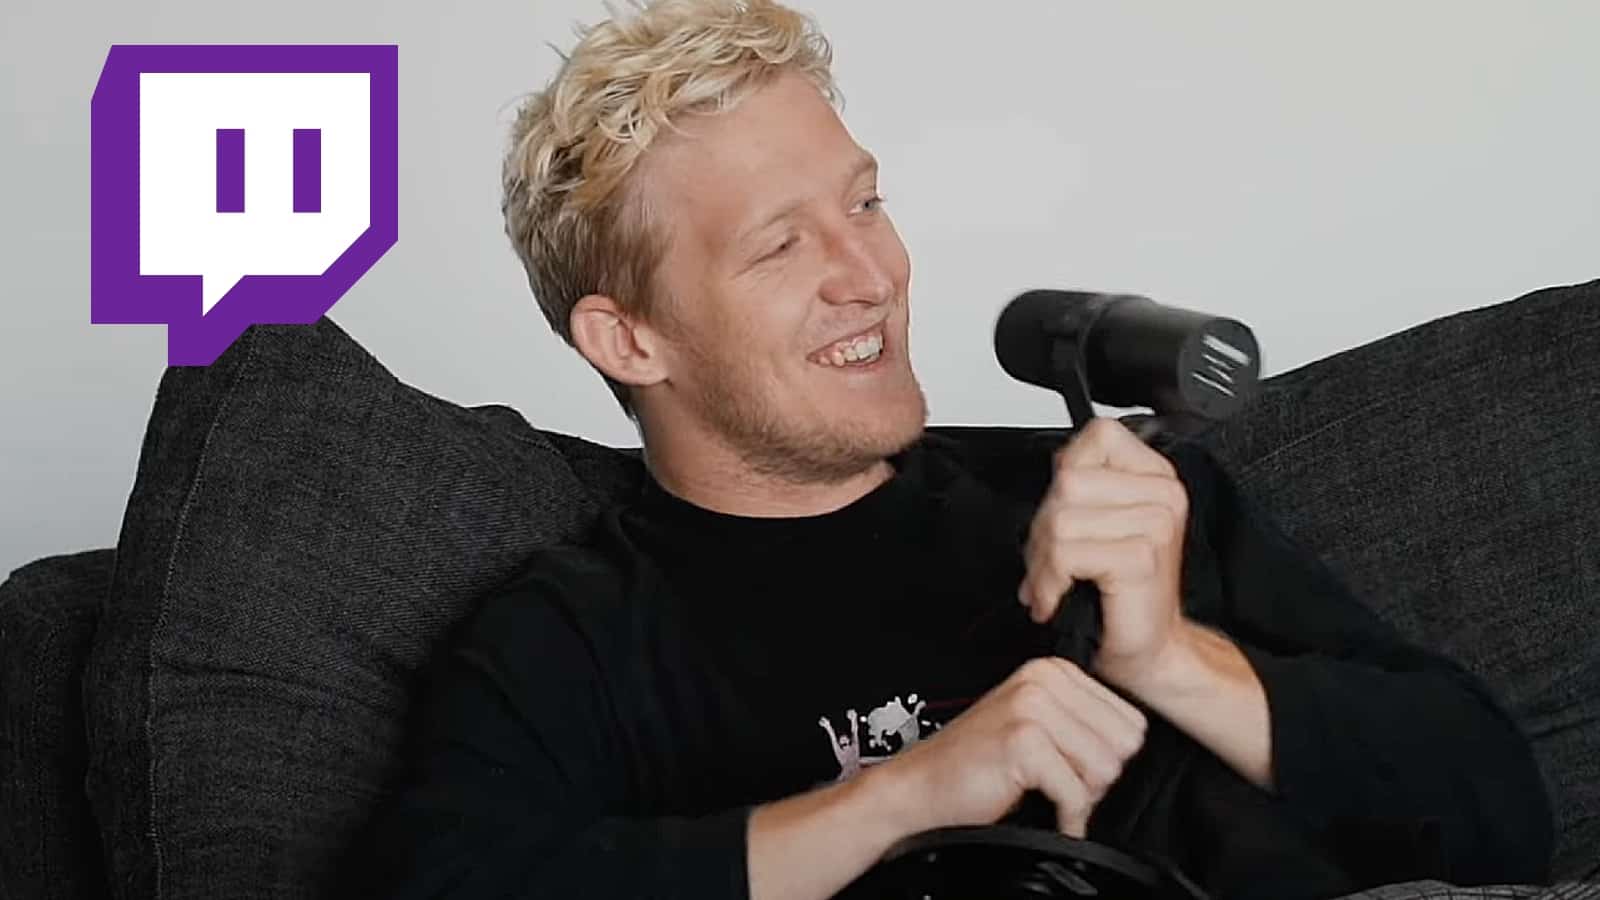 tfue holding microphone with twitch logo in top left corner